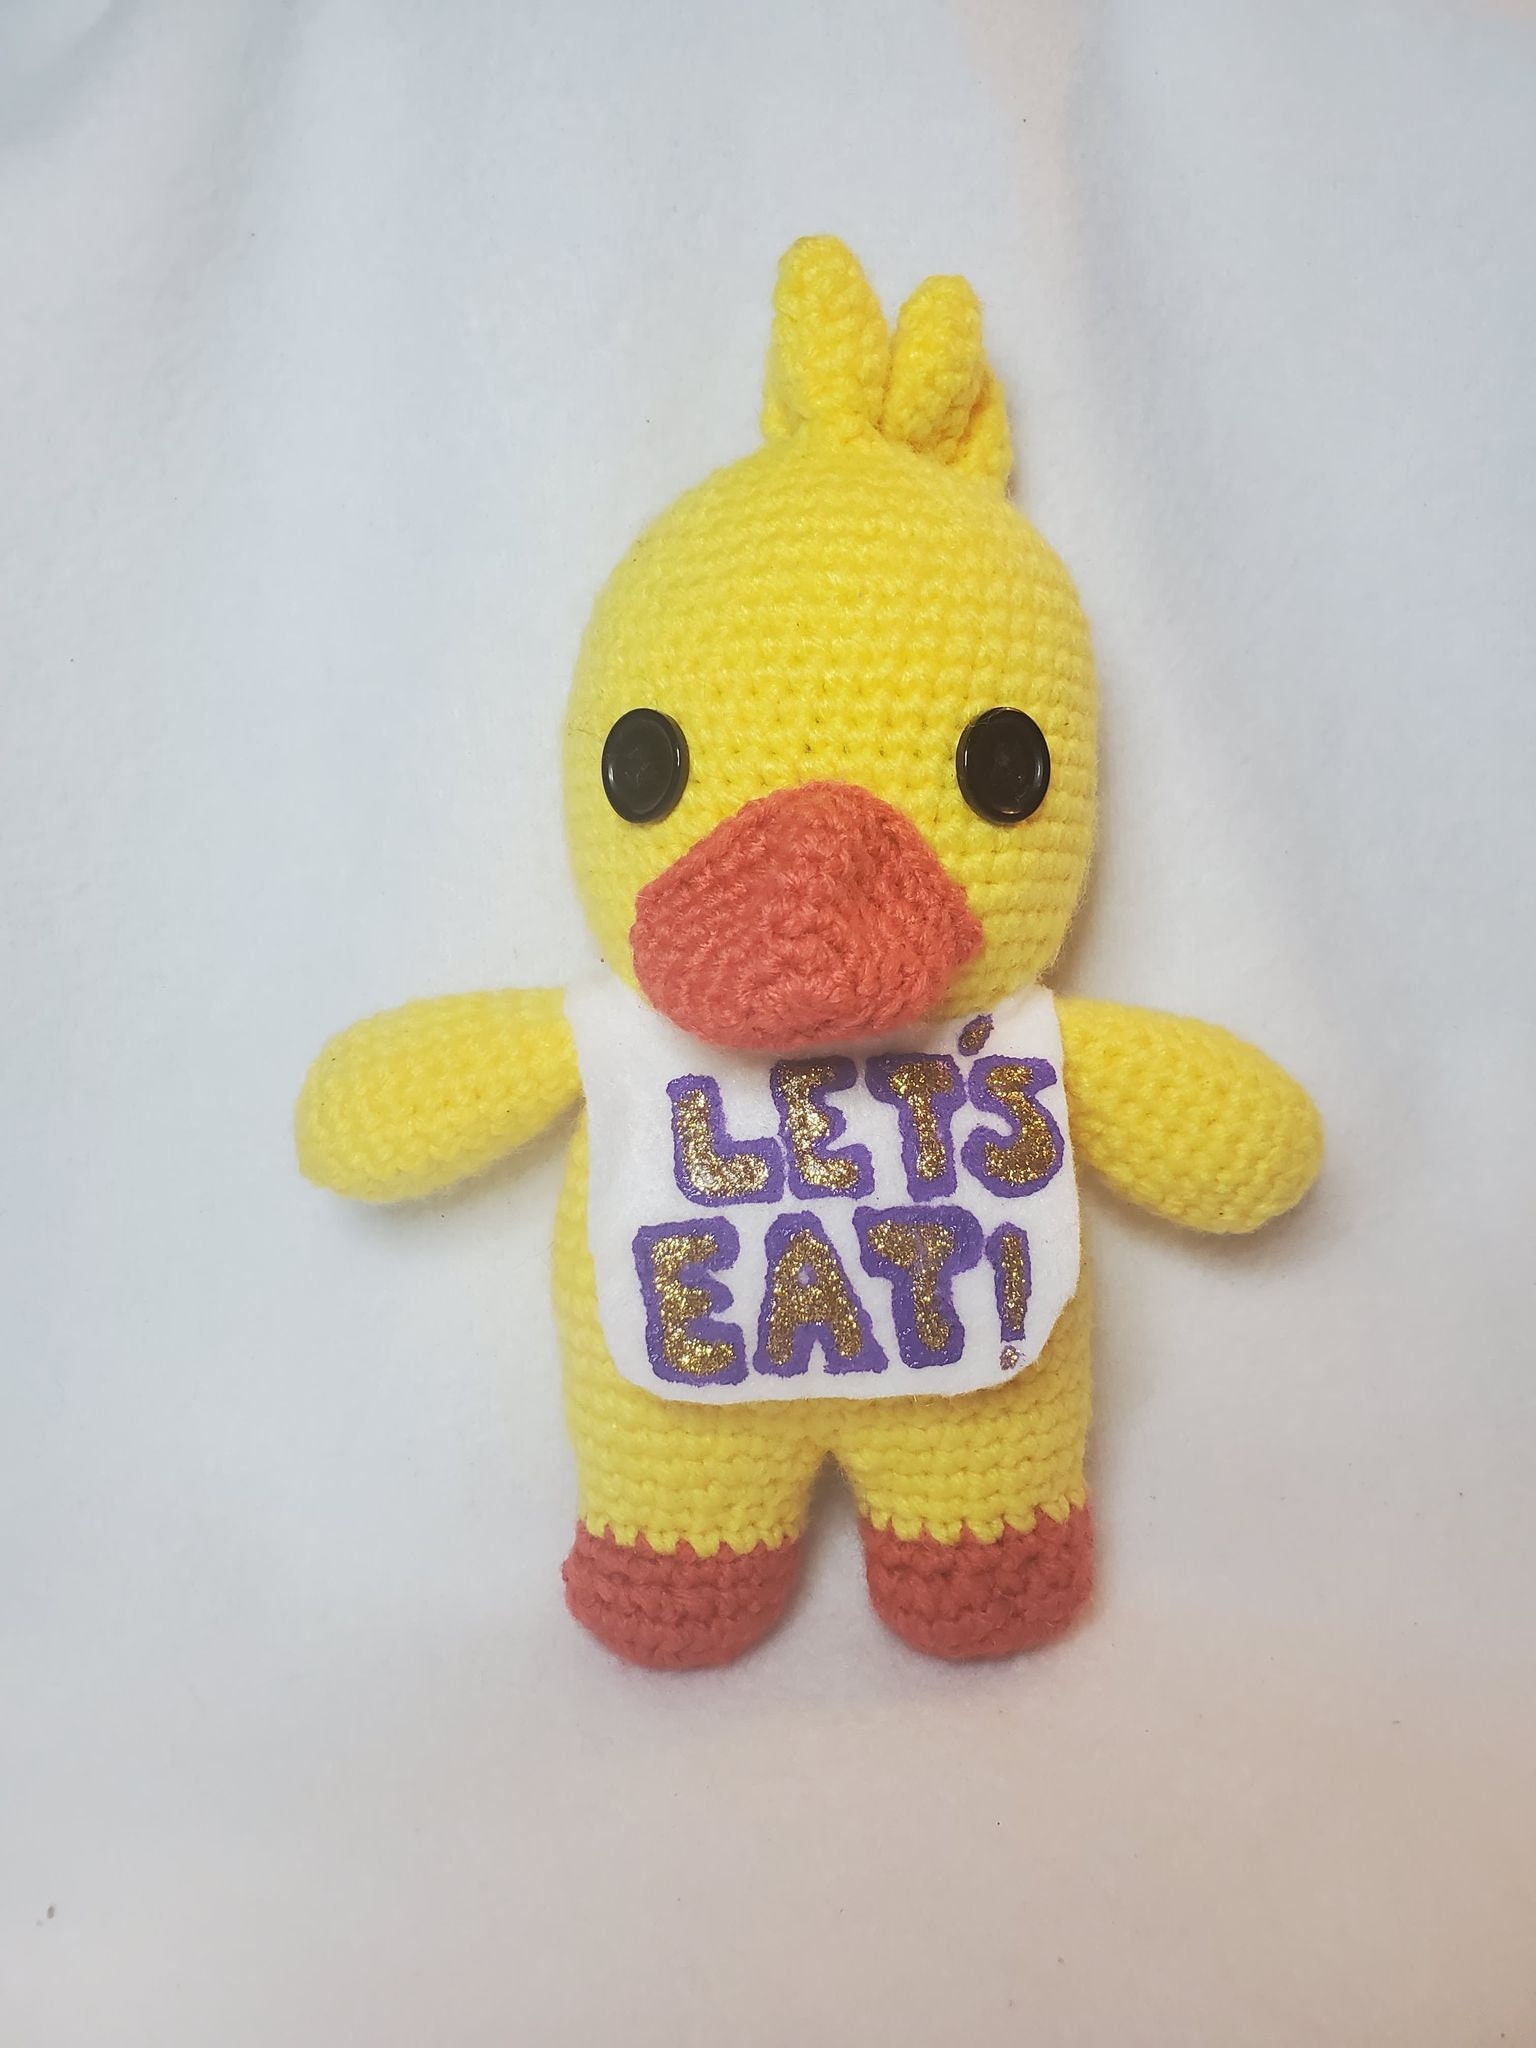 Crochet Chica Plush Toy Five Nights at Freddy's: Security 